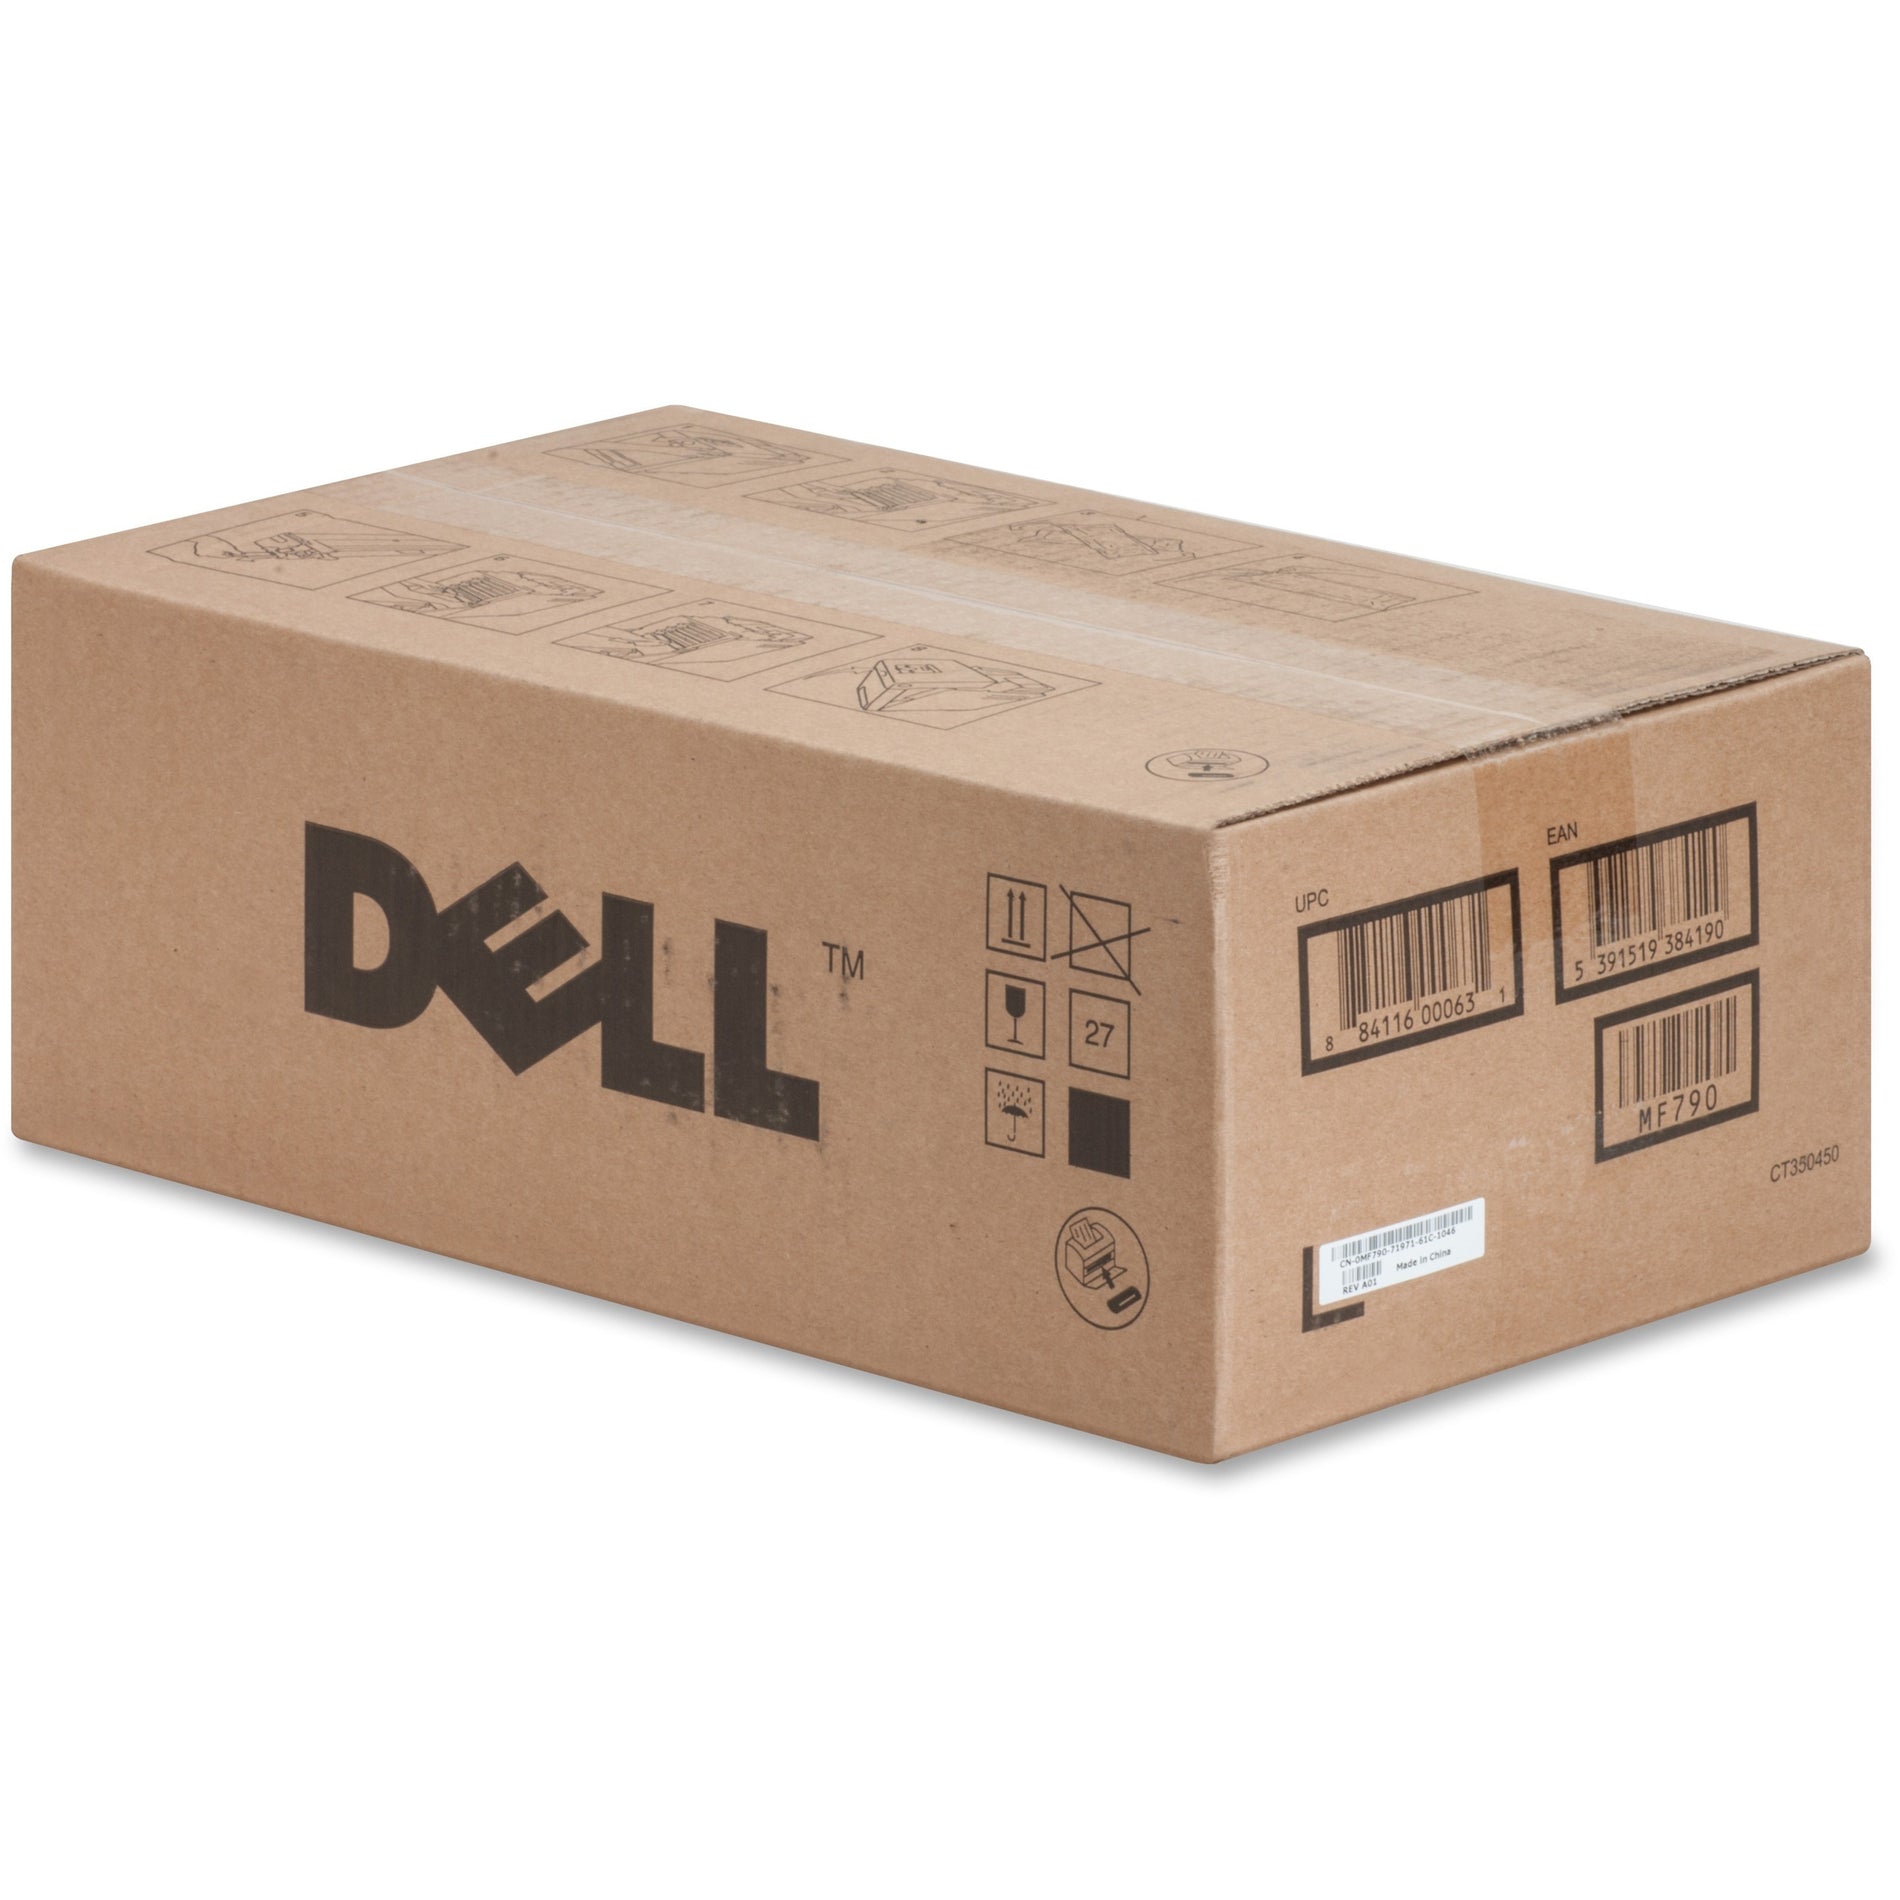 Dell MF790 3110cn/3115cn Standard-yield Toner Cartridge, Magenta, 4000 Pages